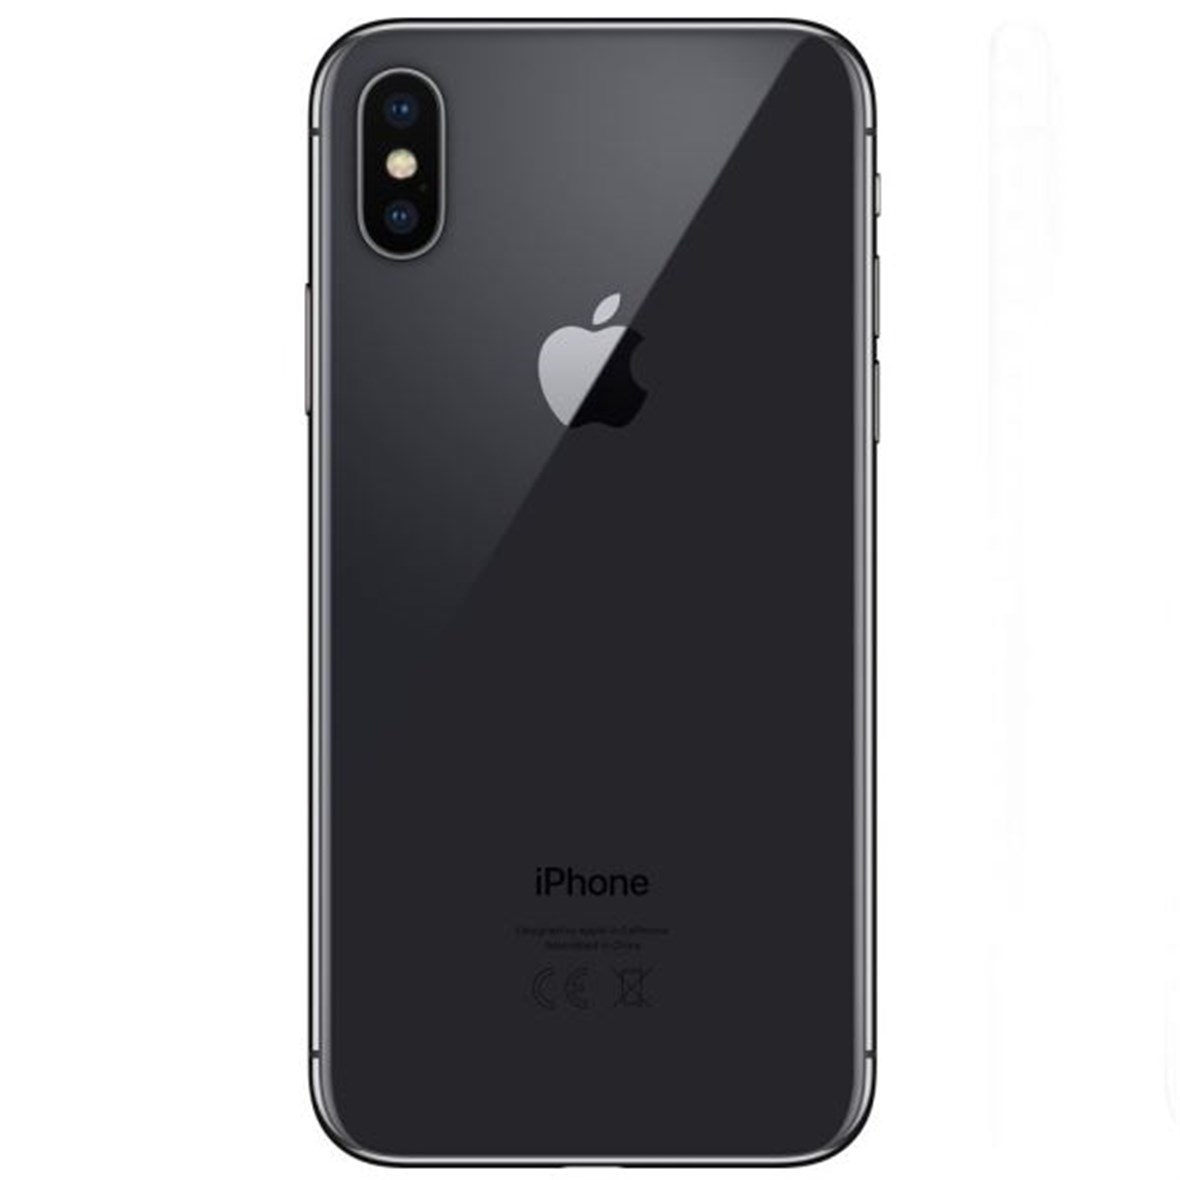 İPHONE X 256 GB SPACE GRAY